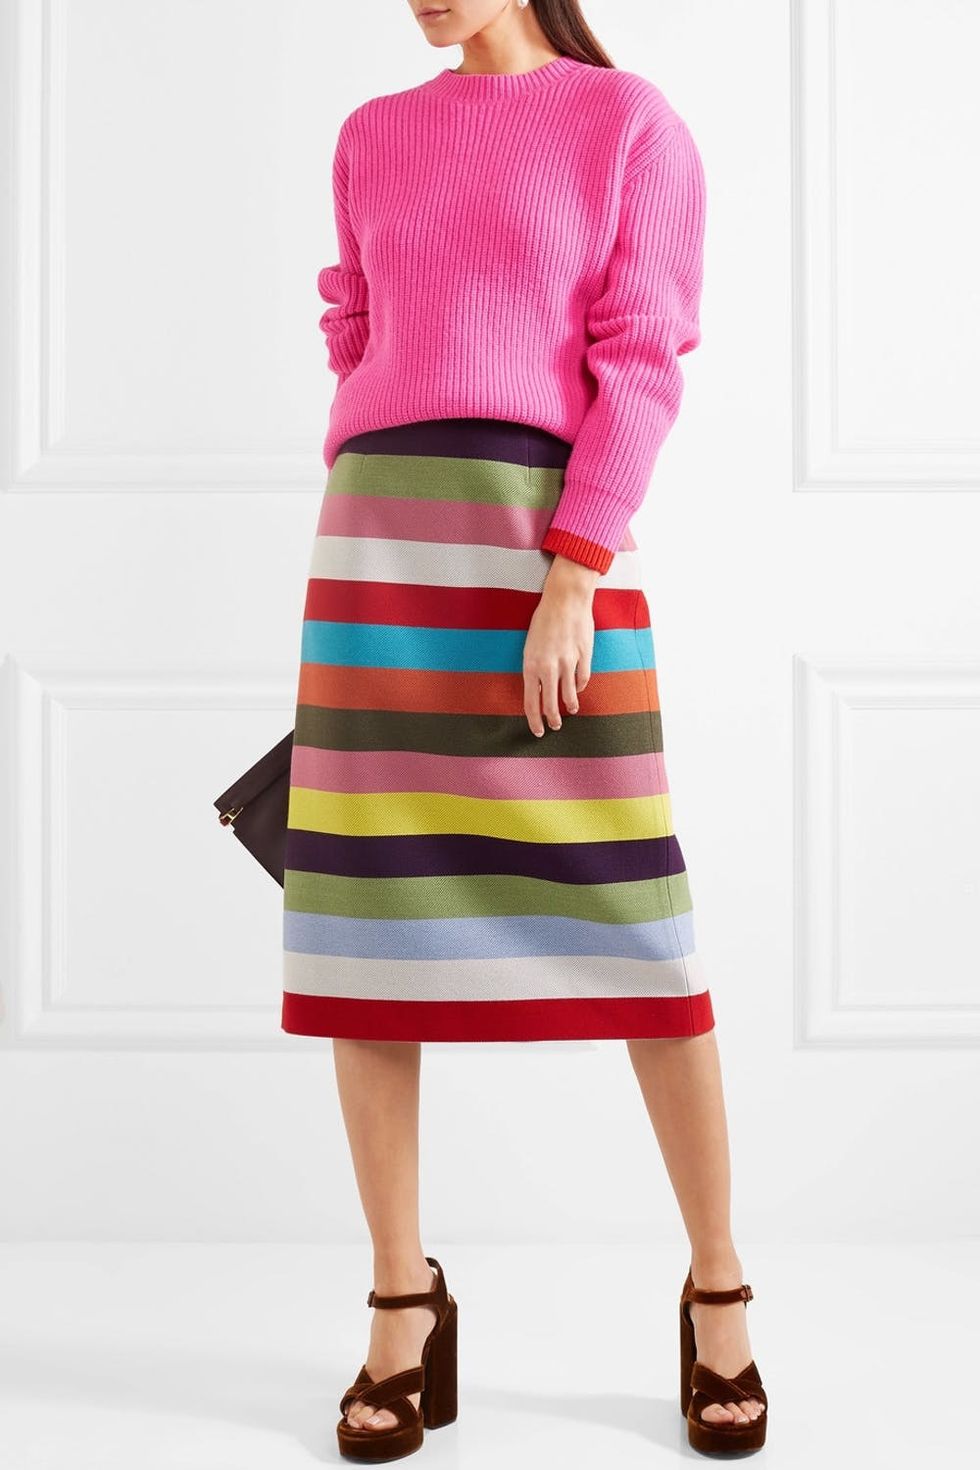 The Rainbow Fashion Trend Is Not Just for Spring Anymore - Brit + Co